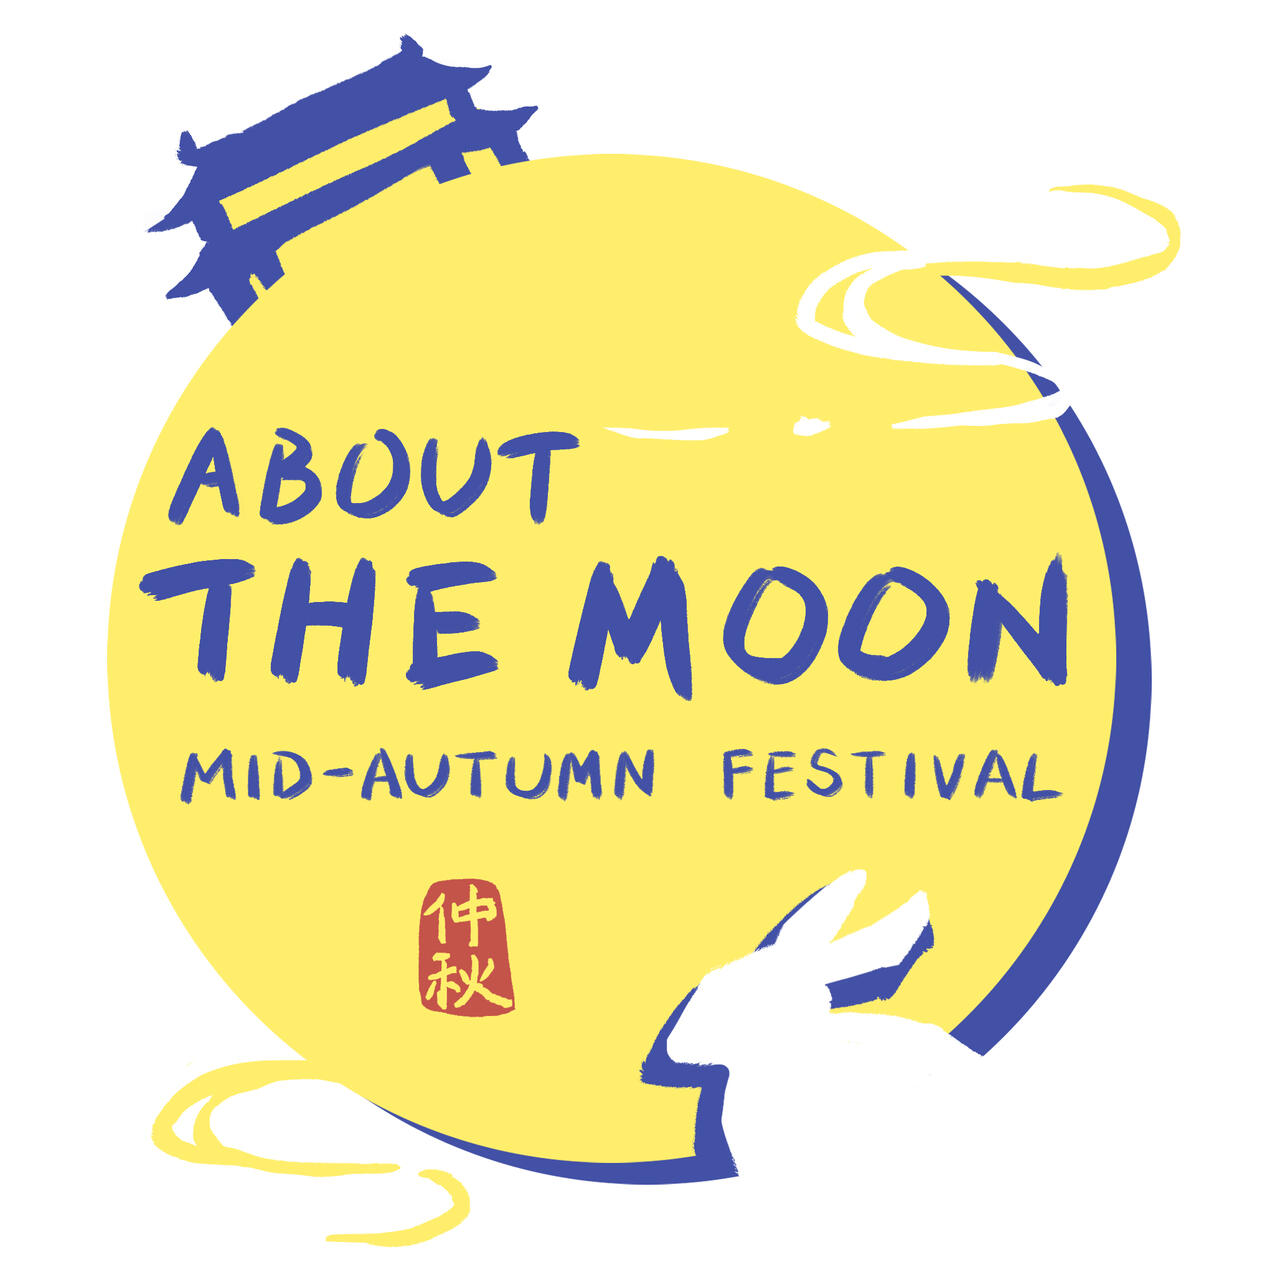 About the Moon illustrative poster